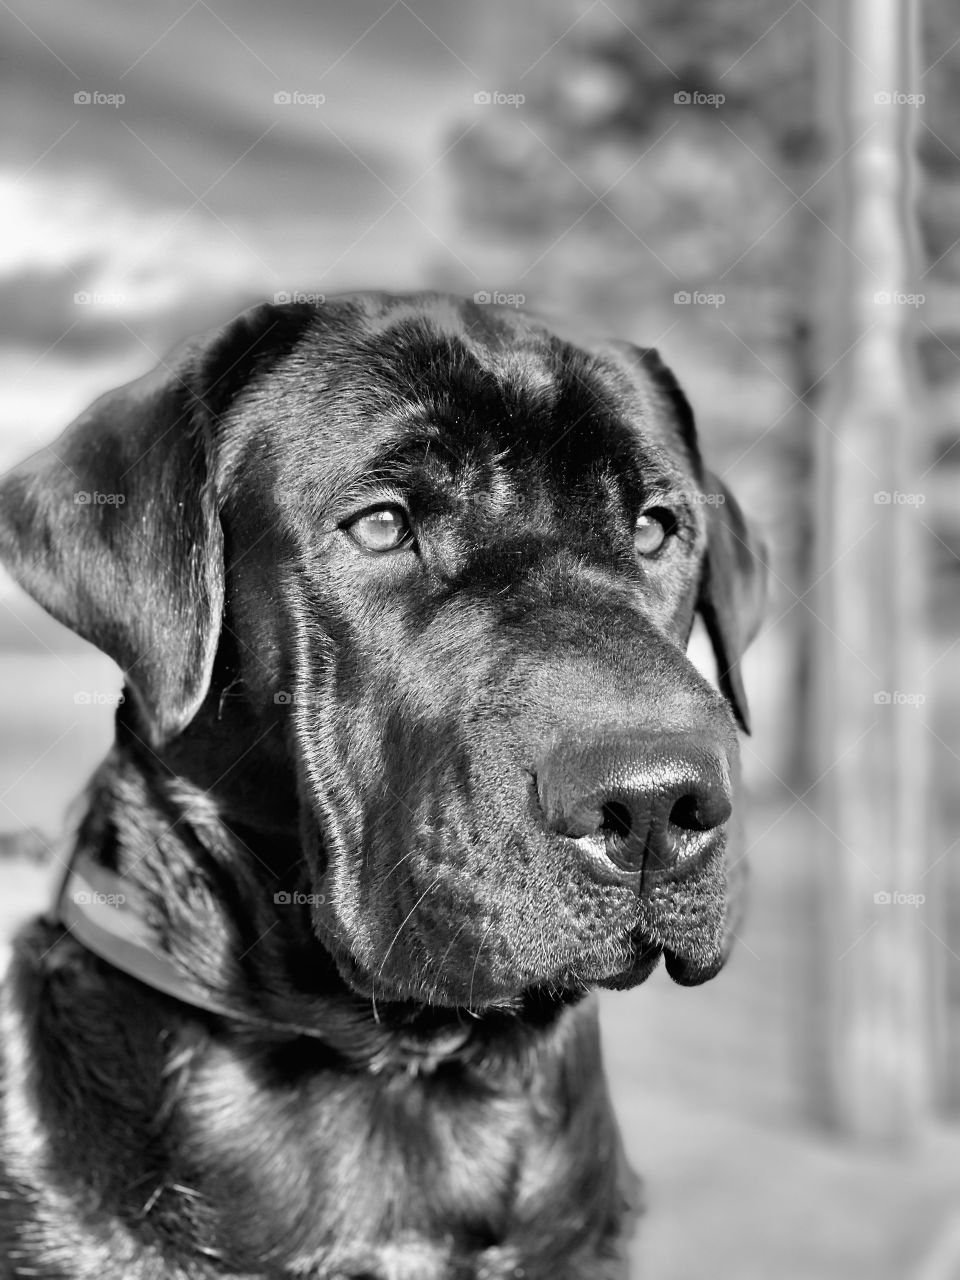 Beautiful headshot of a Black Labrador Retriever taken in Noir while she scans the countryside.